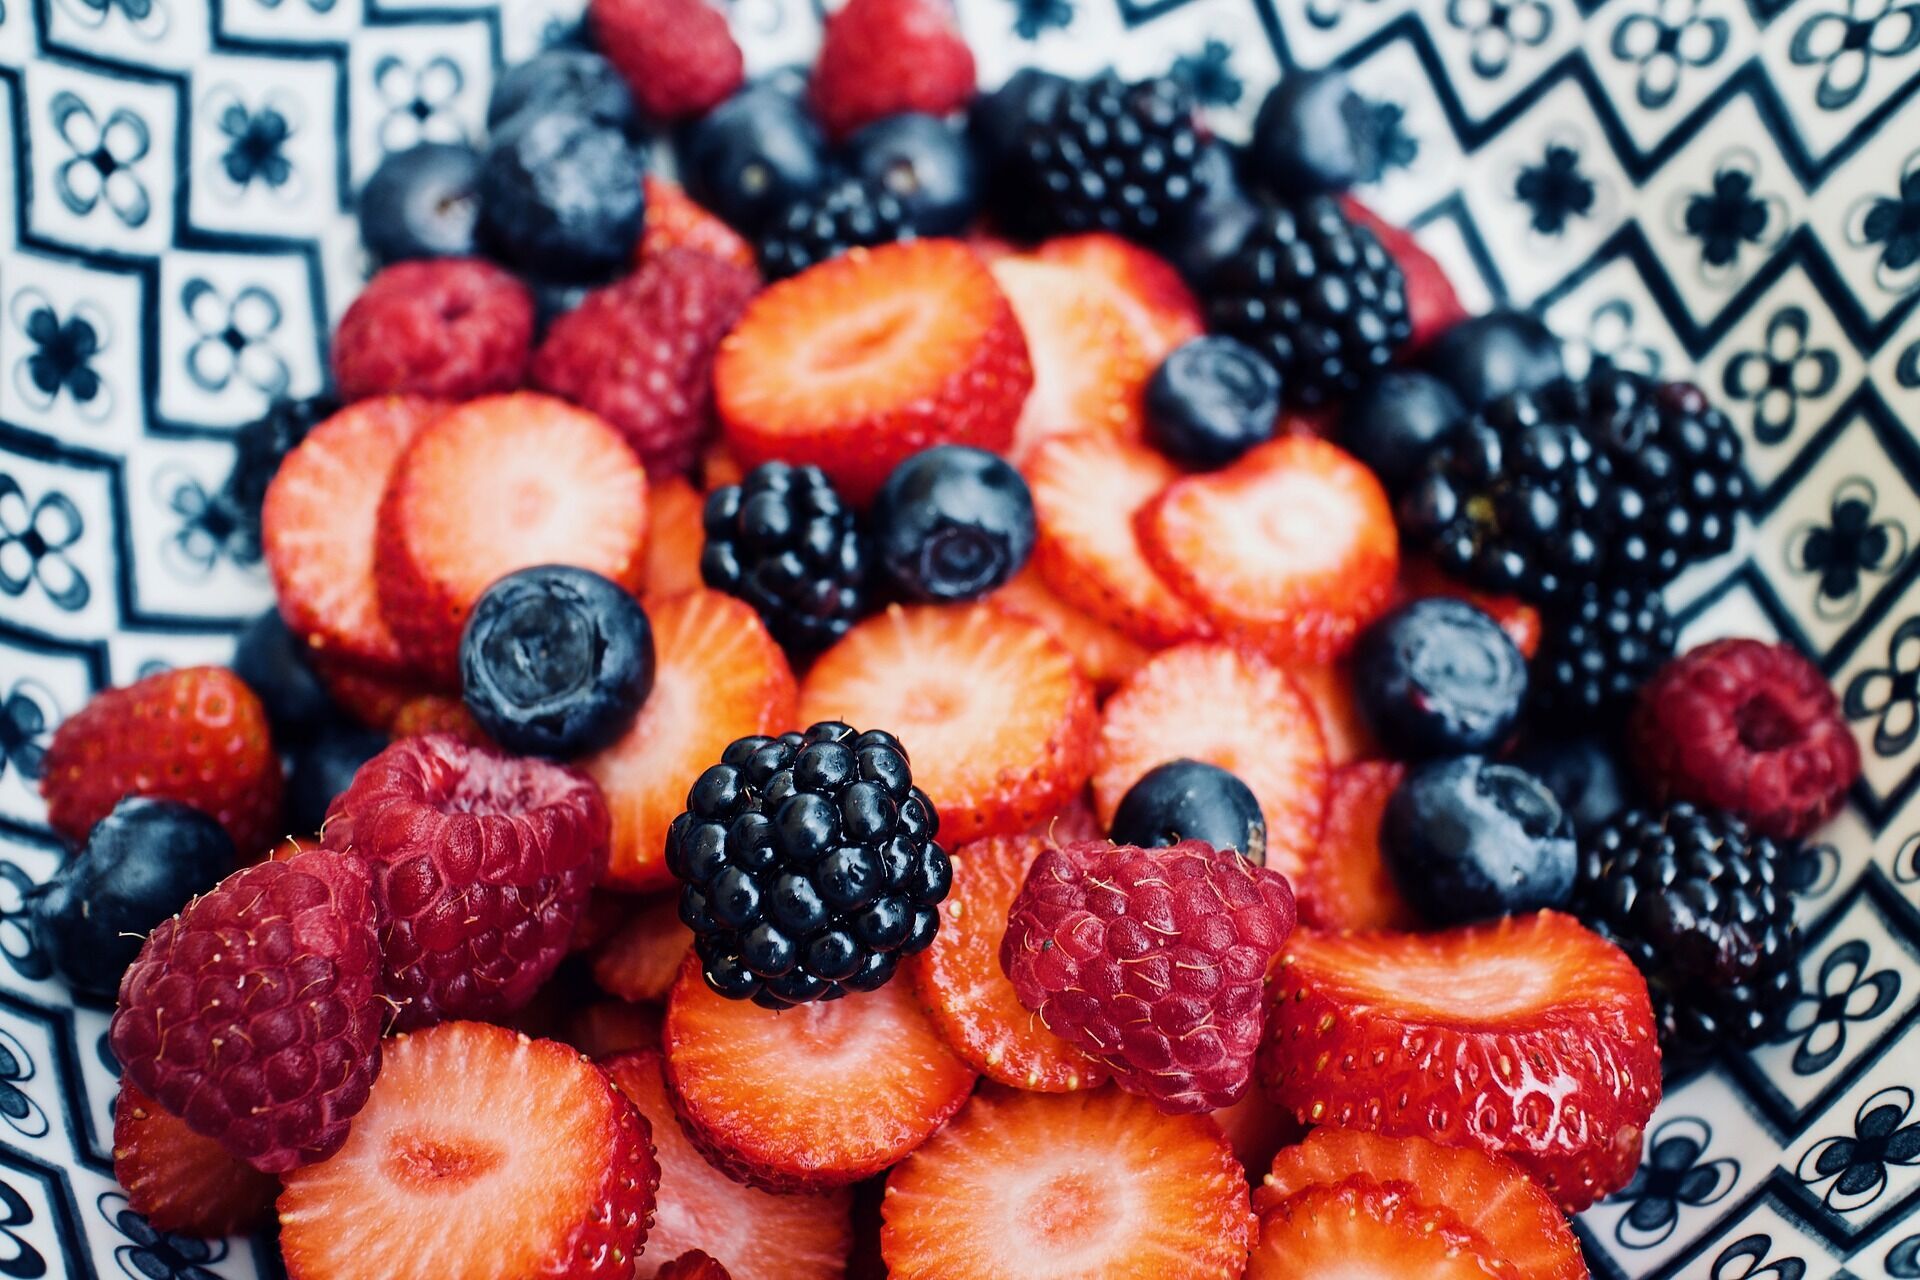 Berries can be sublimated